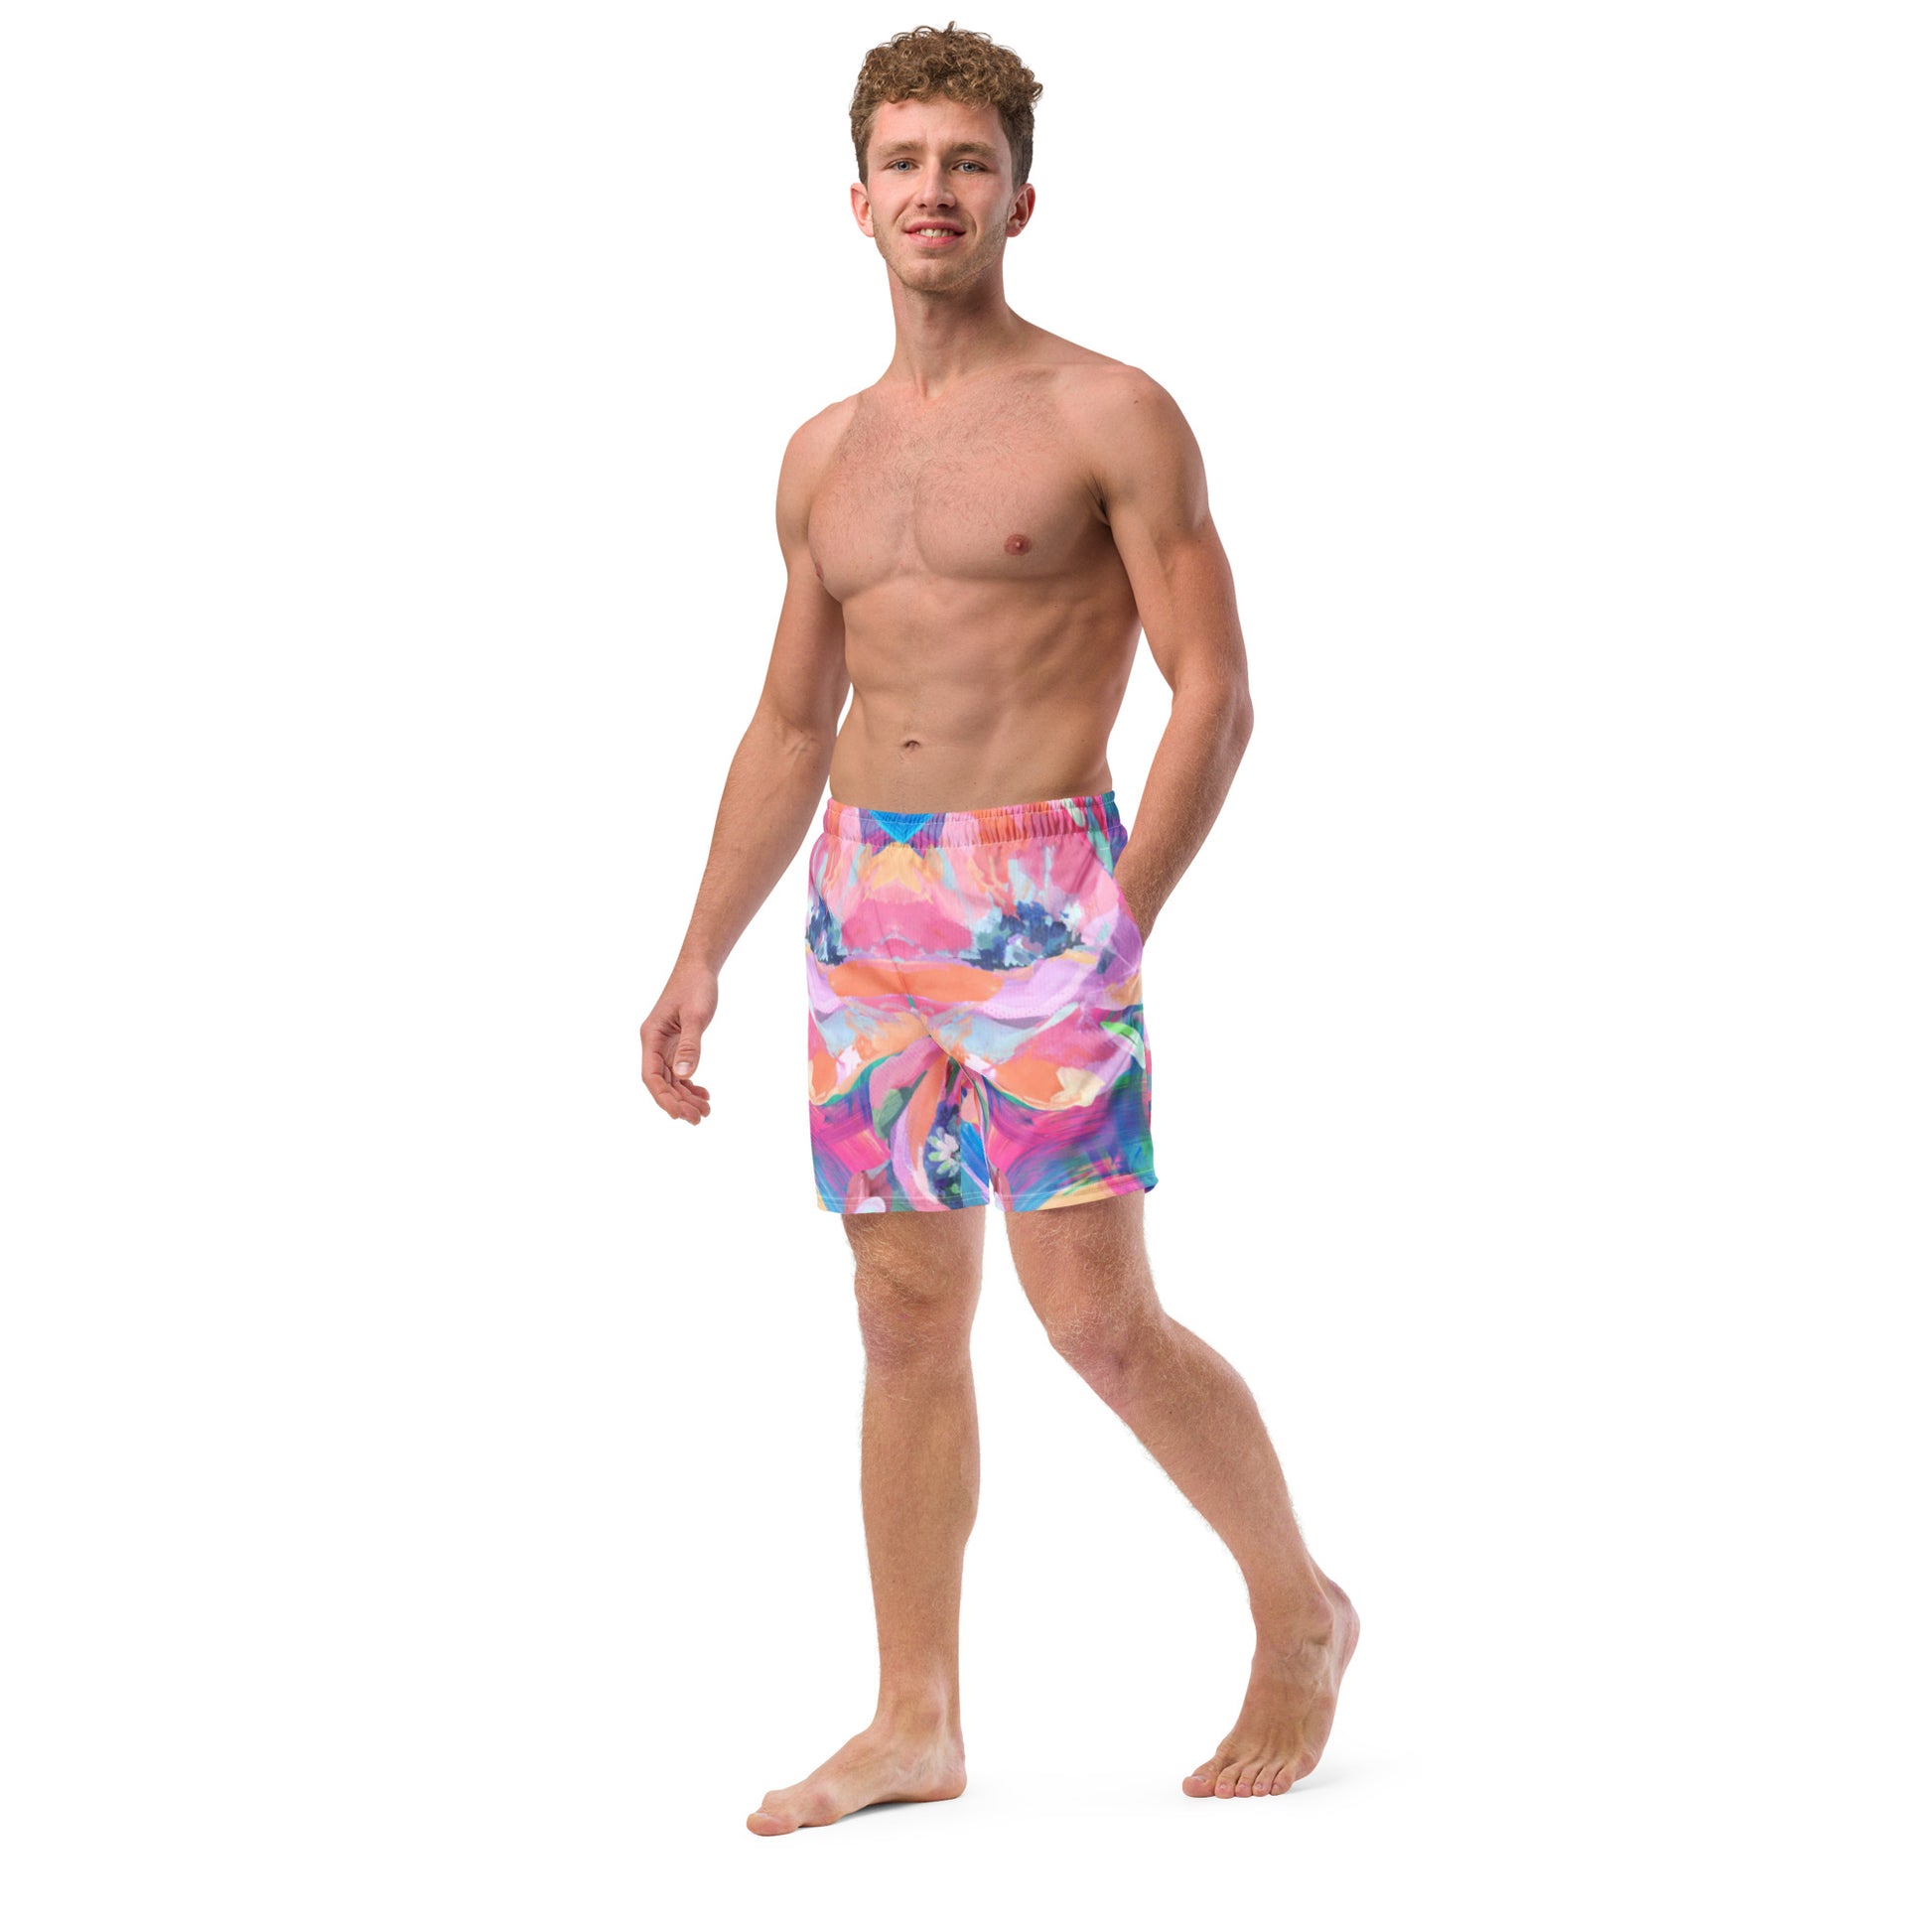 Humble Sportswear™ men's abstract floral pink mesh swim trunks